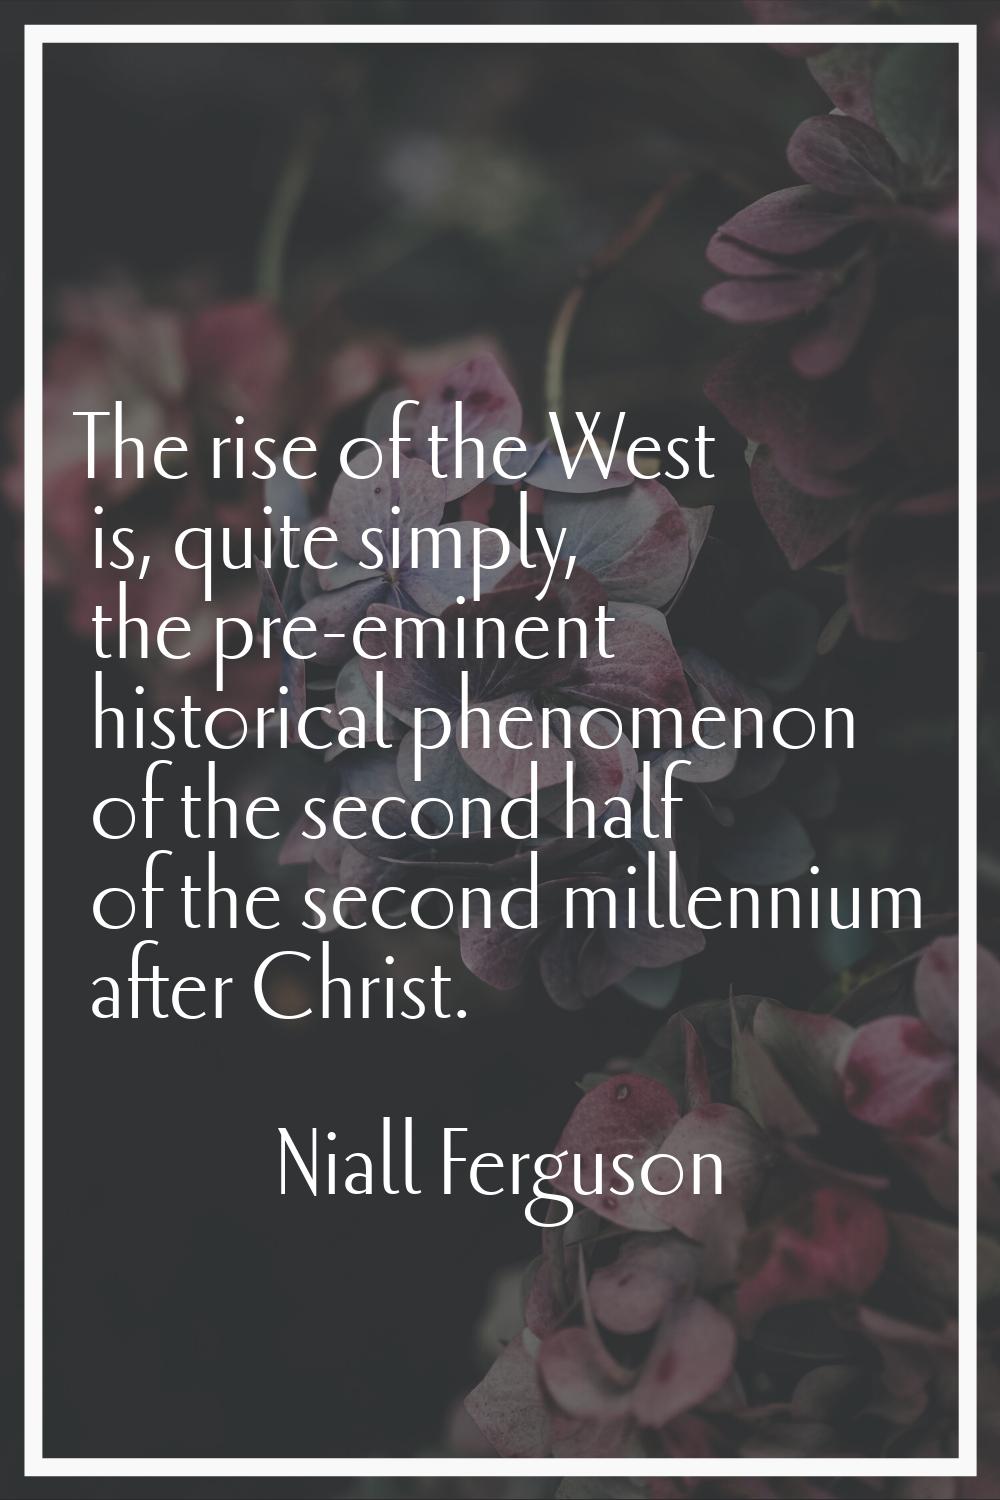 The rise of the West is, quite simply, the pre-eminent historical phenomenon of the second half of 